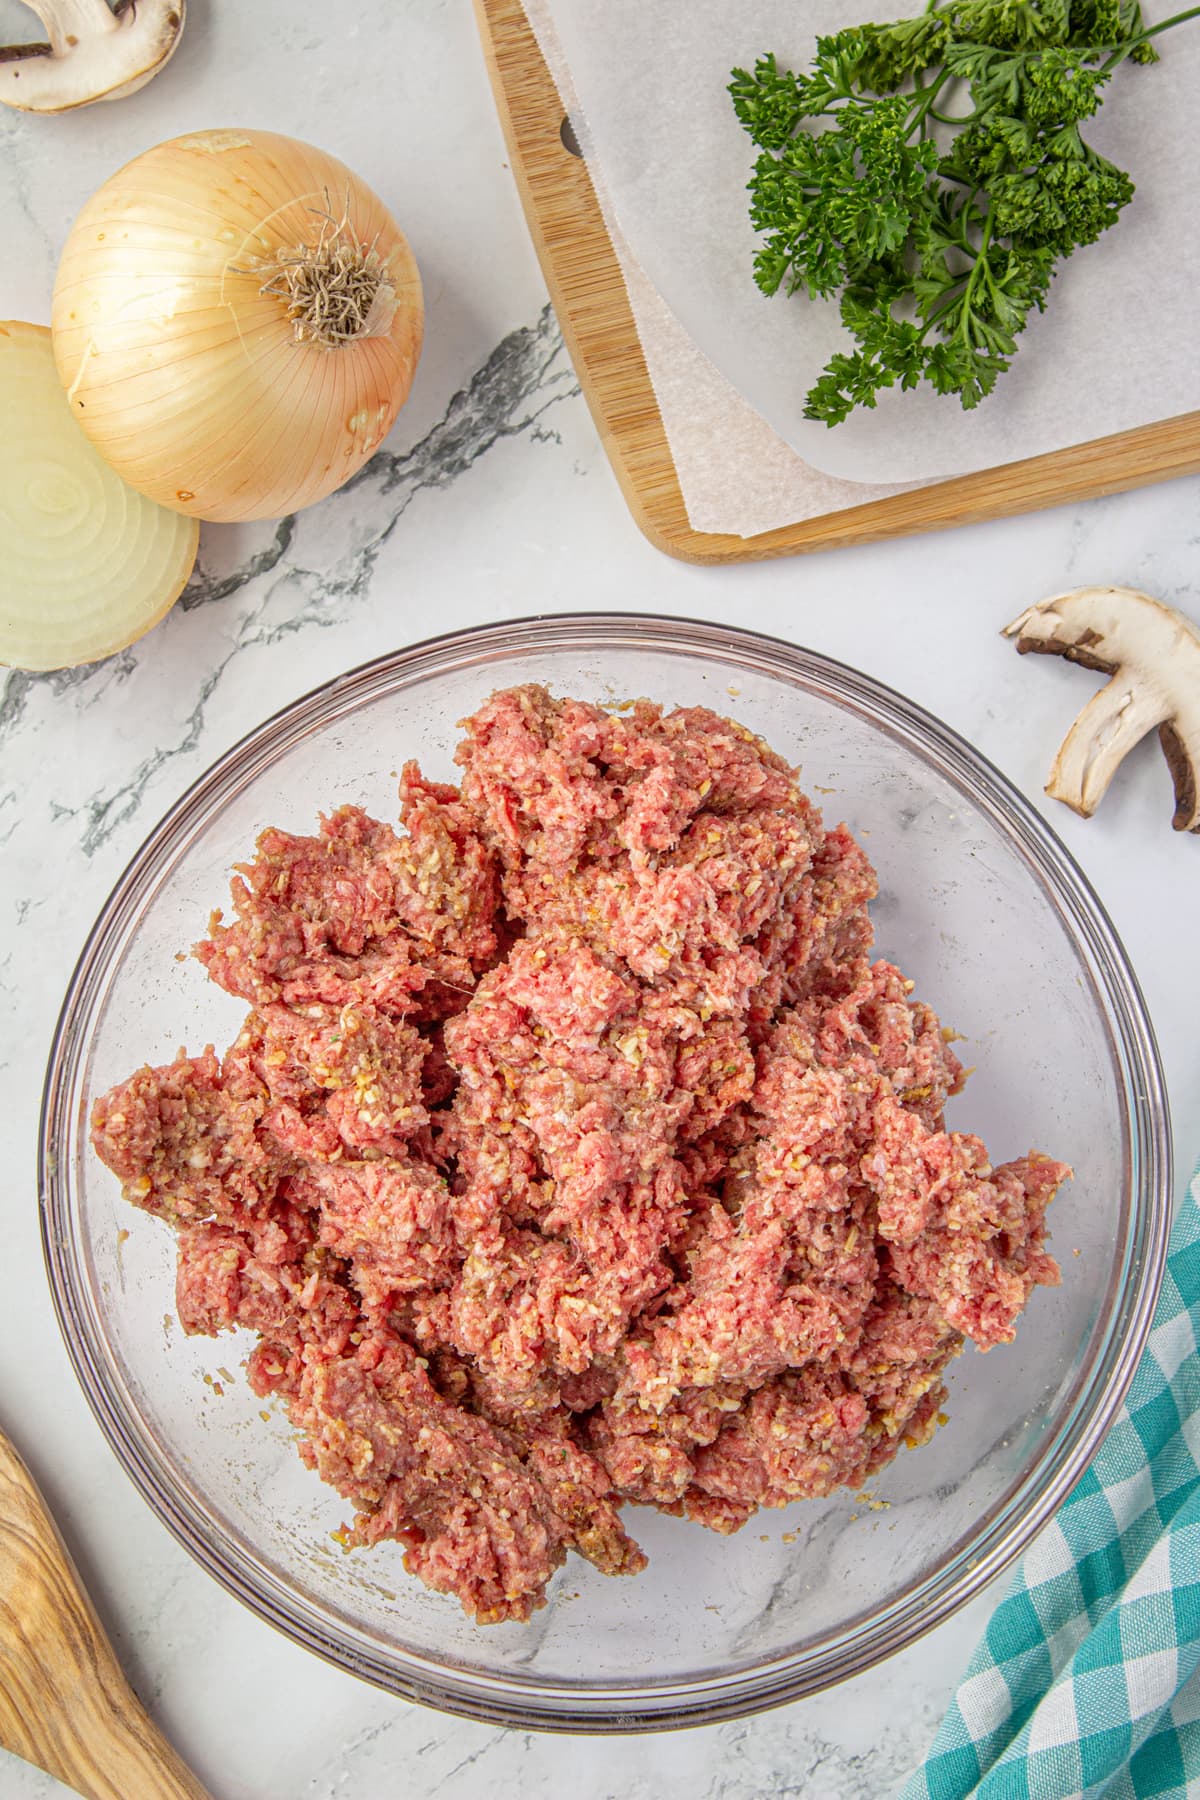 Seasonings mixed into ground beef in a bowl.